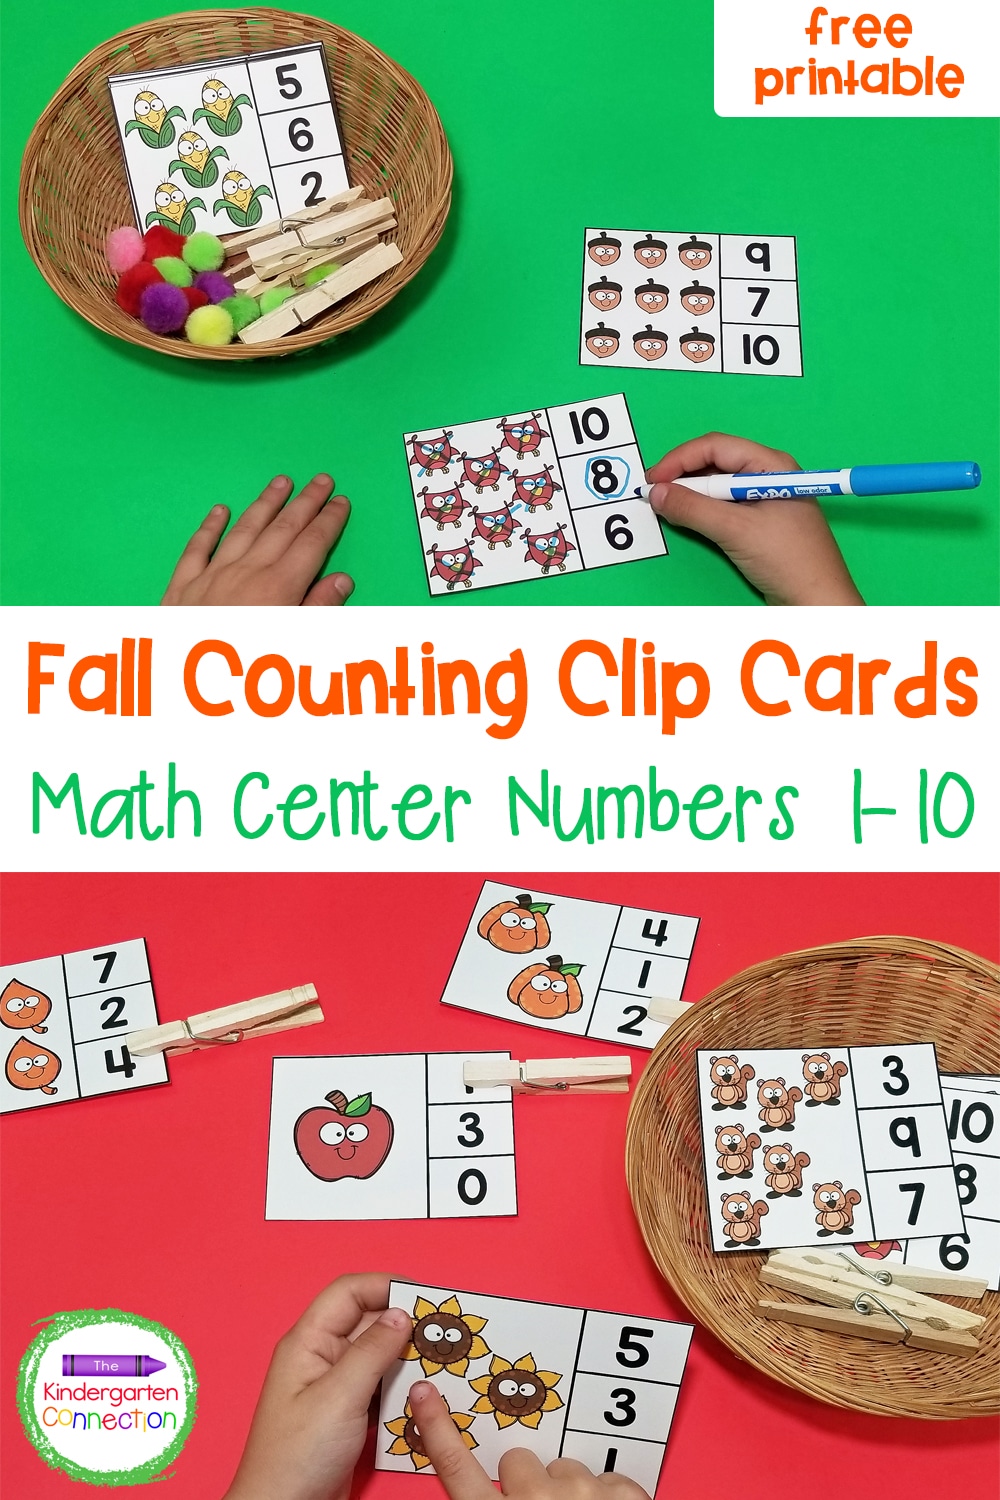 Practice counting and 1:1 correspondence with our free Fall Counting Clip Cards. They're perfect for Pre-K or Kindergarten math centers!